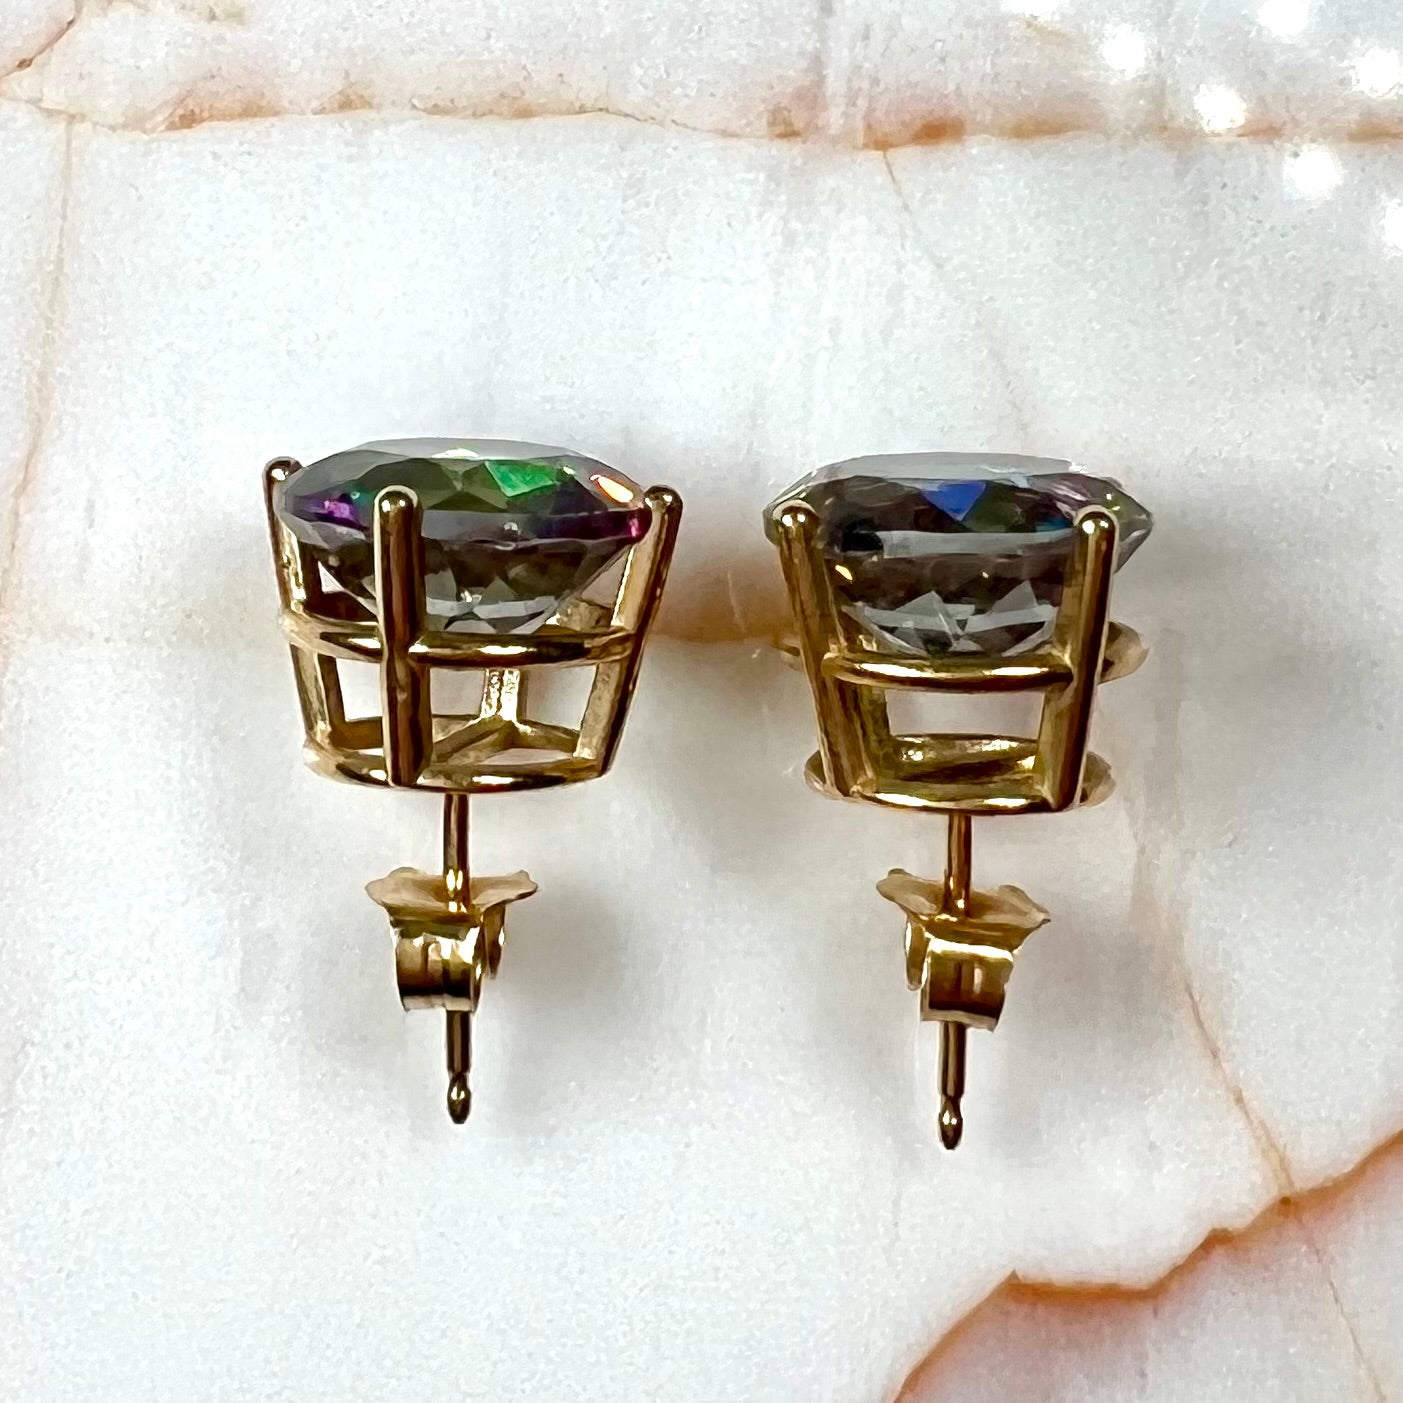 Round cut mystic topaz stones set in yellow gold prong-set push-back earrings.